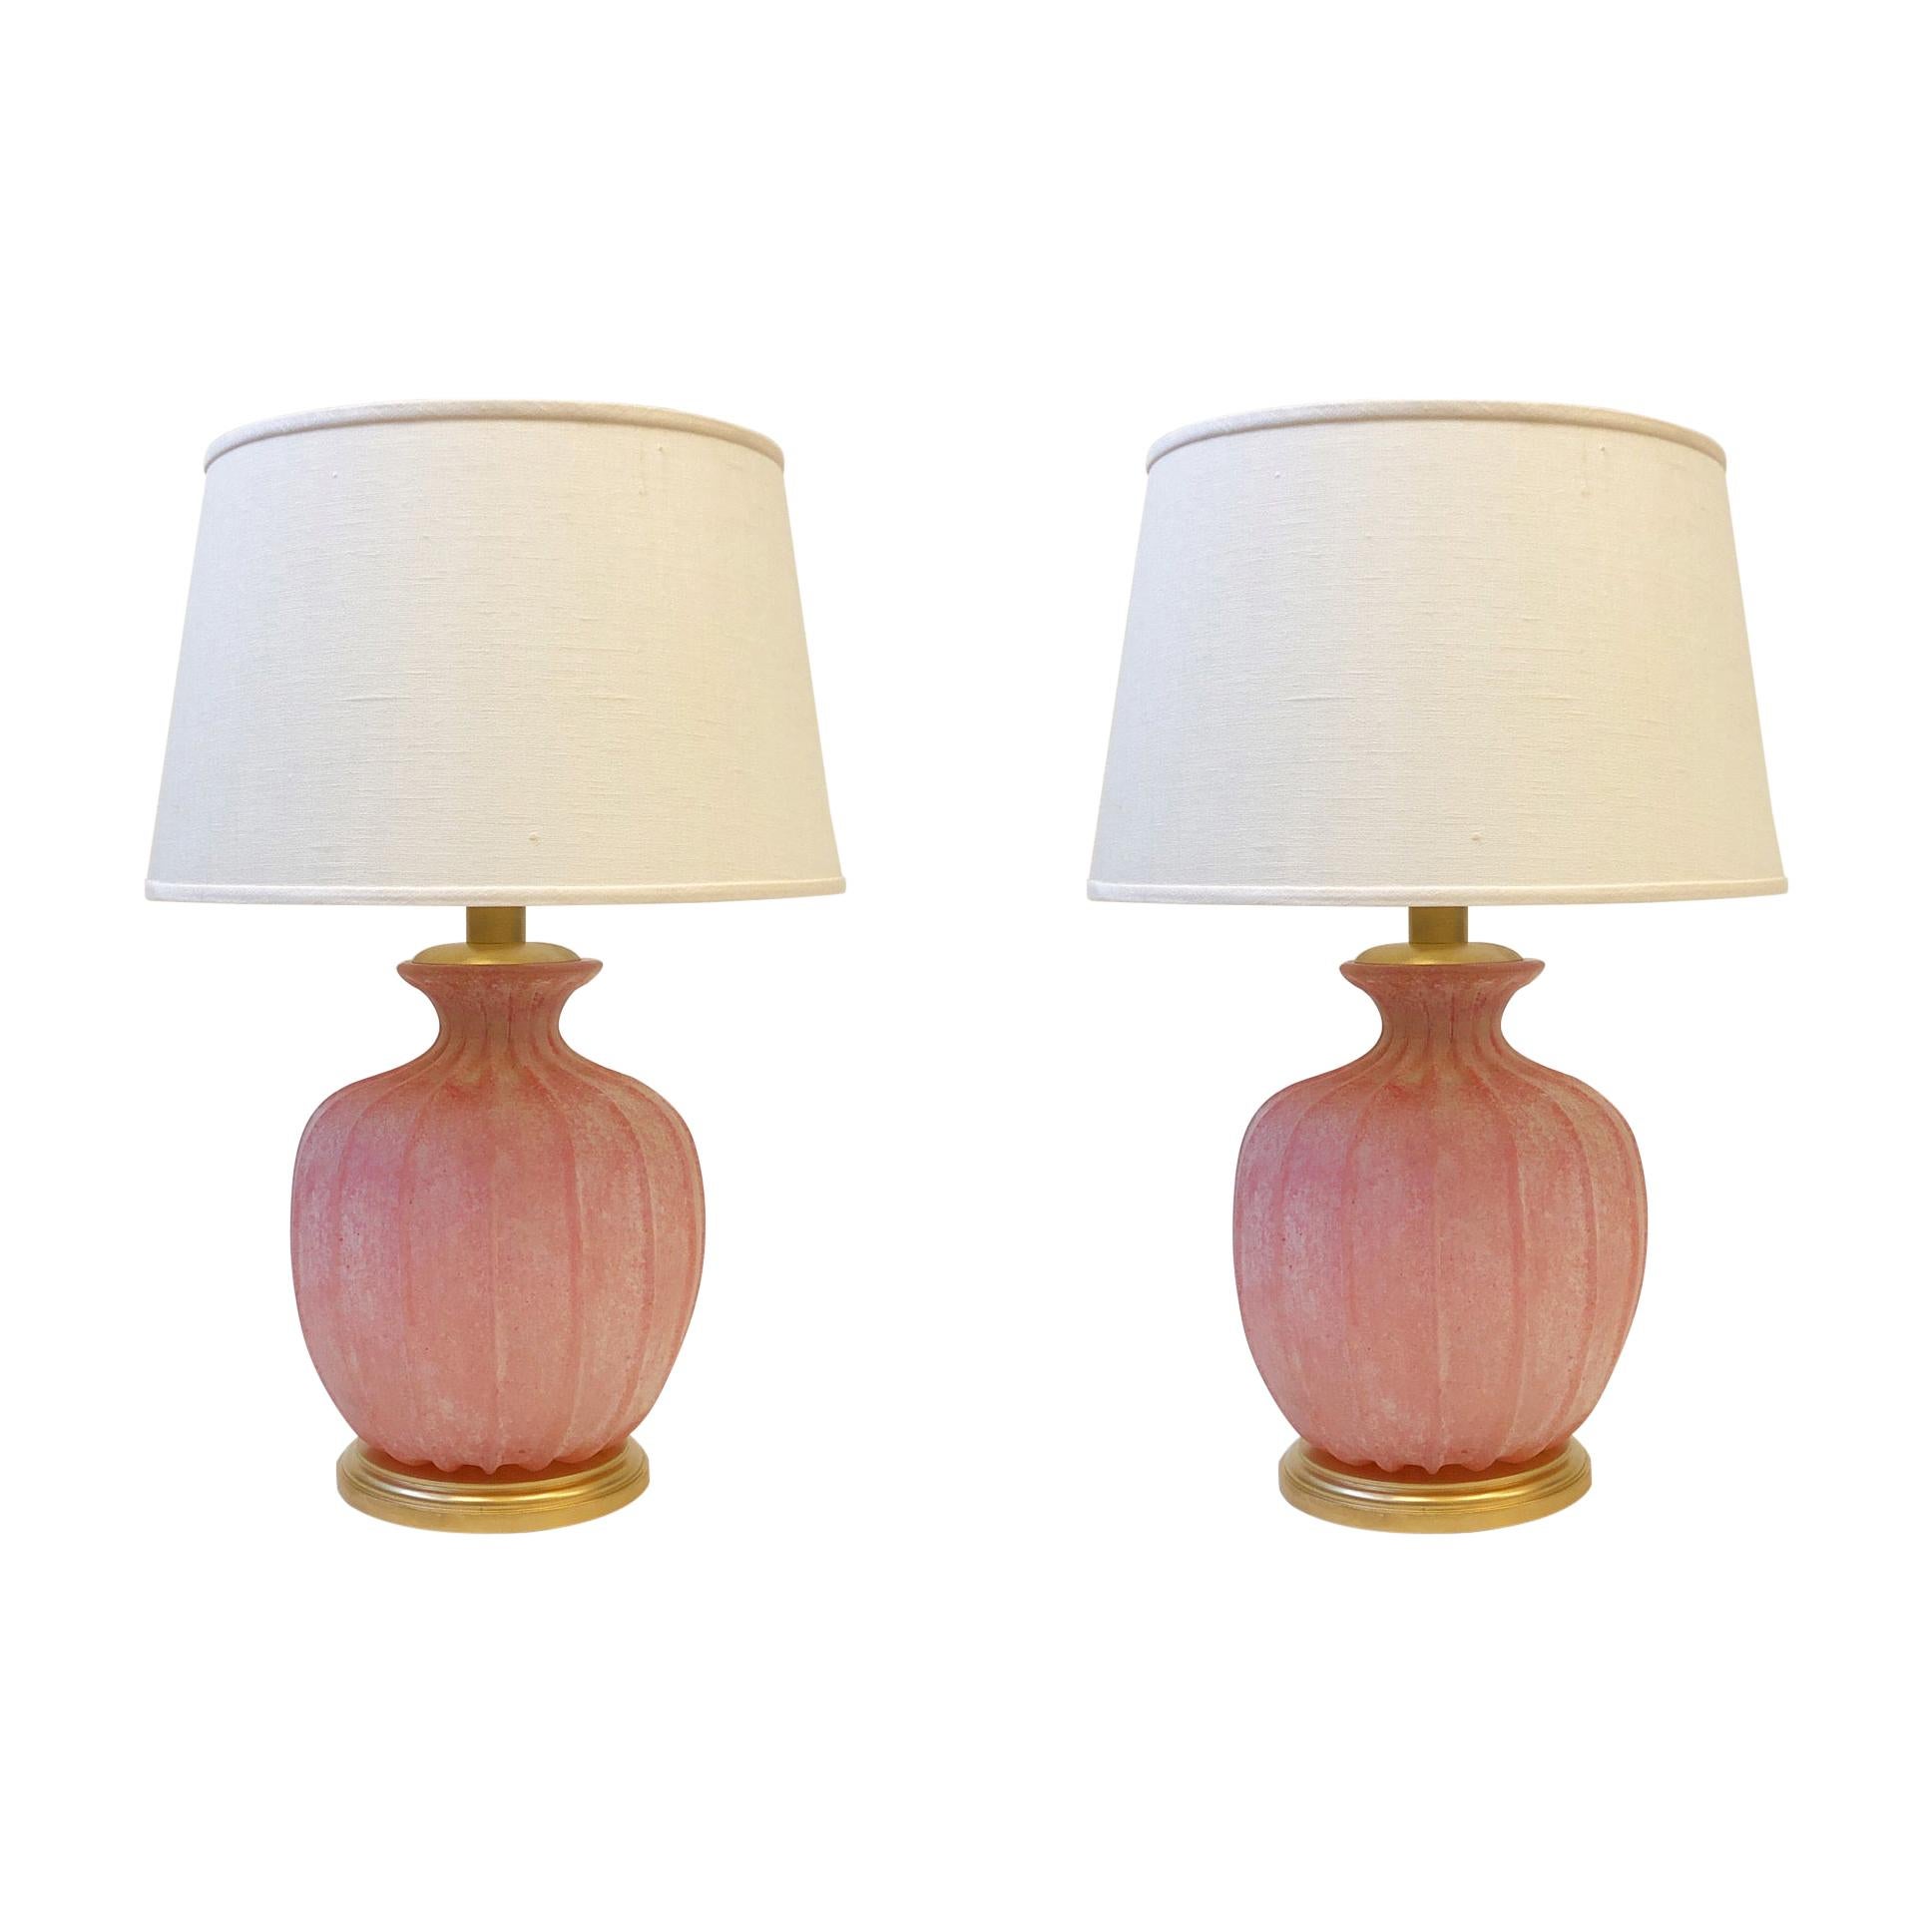 Pair of Pink Scavo Murano Glass Table Lamps by Seguso Vetri d'Arte